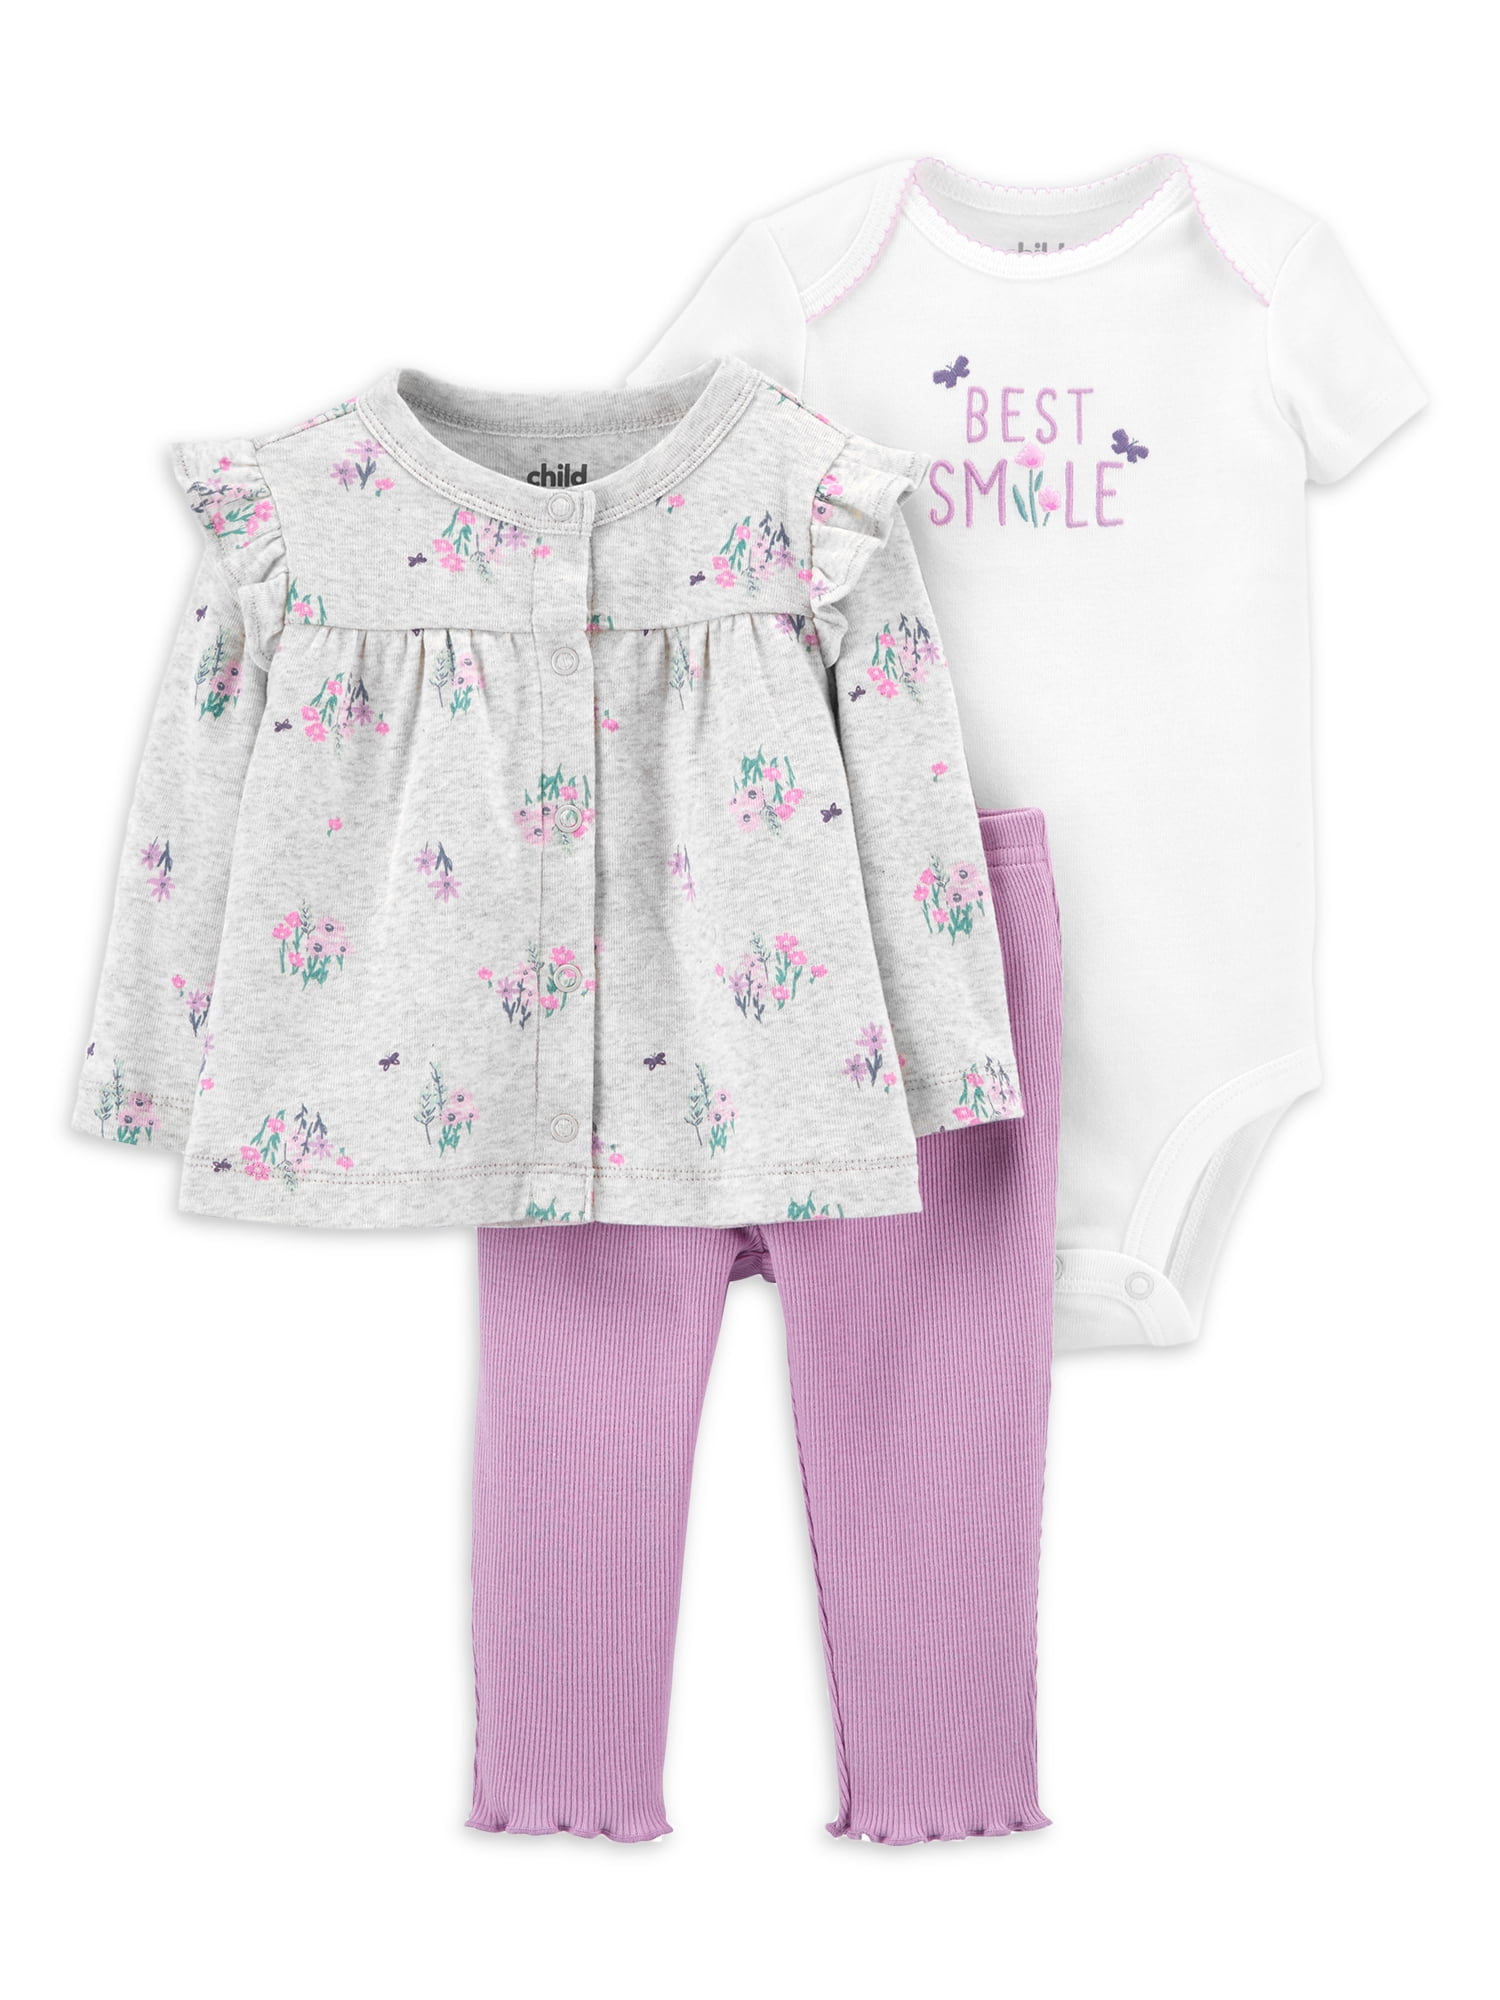 Carter's Infant Girls 3-Piece Cardigan Set Pink & White 'Happy Heart' NWT outfit 